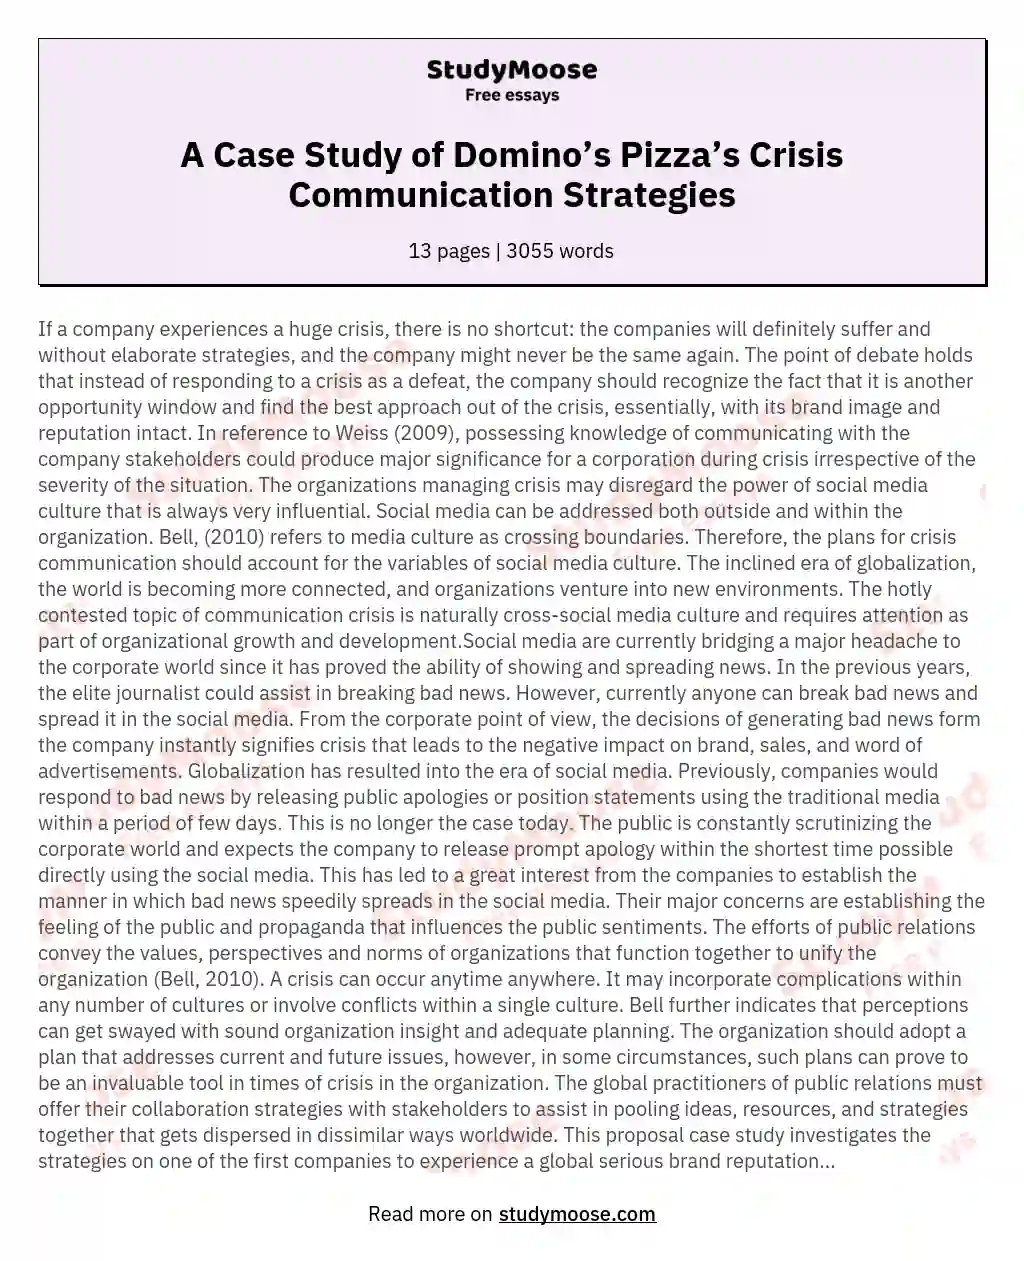 A Case Study of Domino’s Pizza’s Crisis Communication Strategies